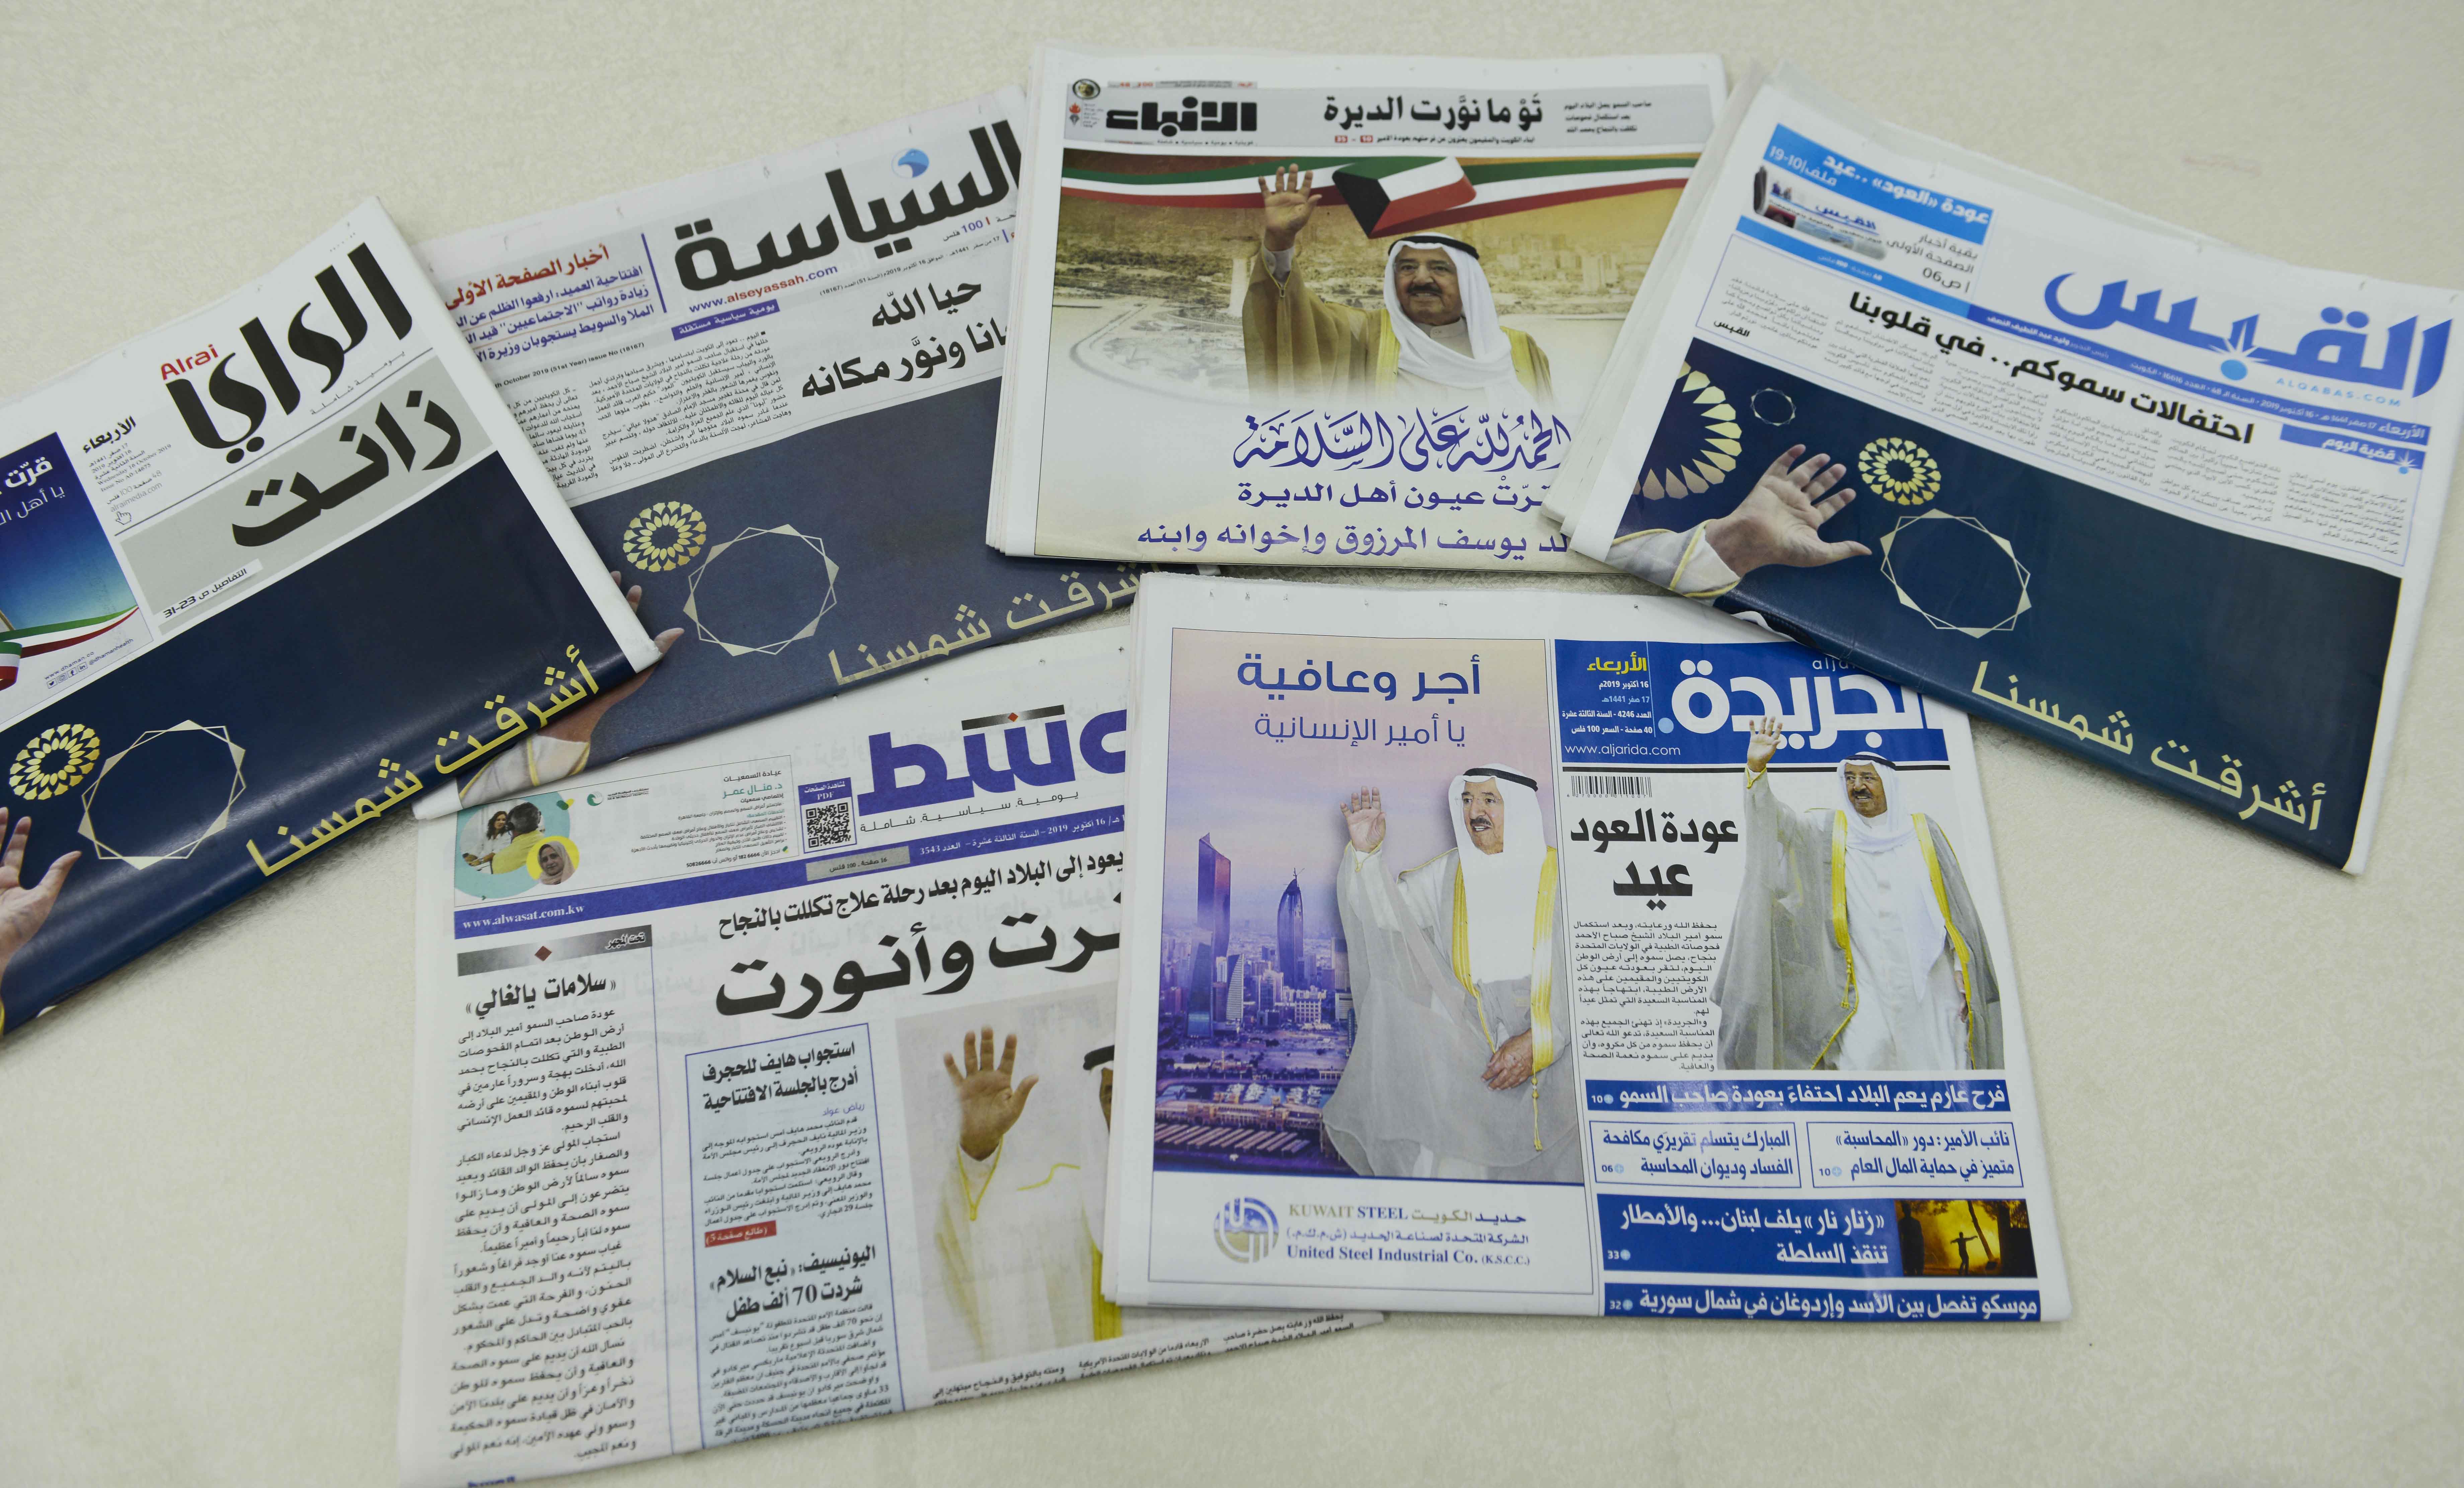 Headlines of HH the Amir's return dominated the front pages of the local newspapers